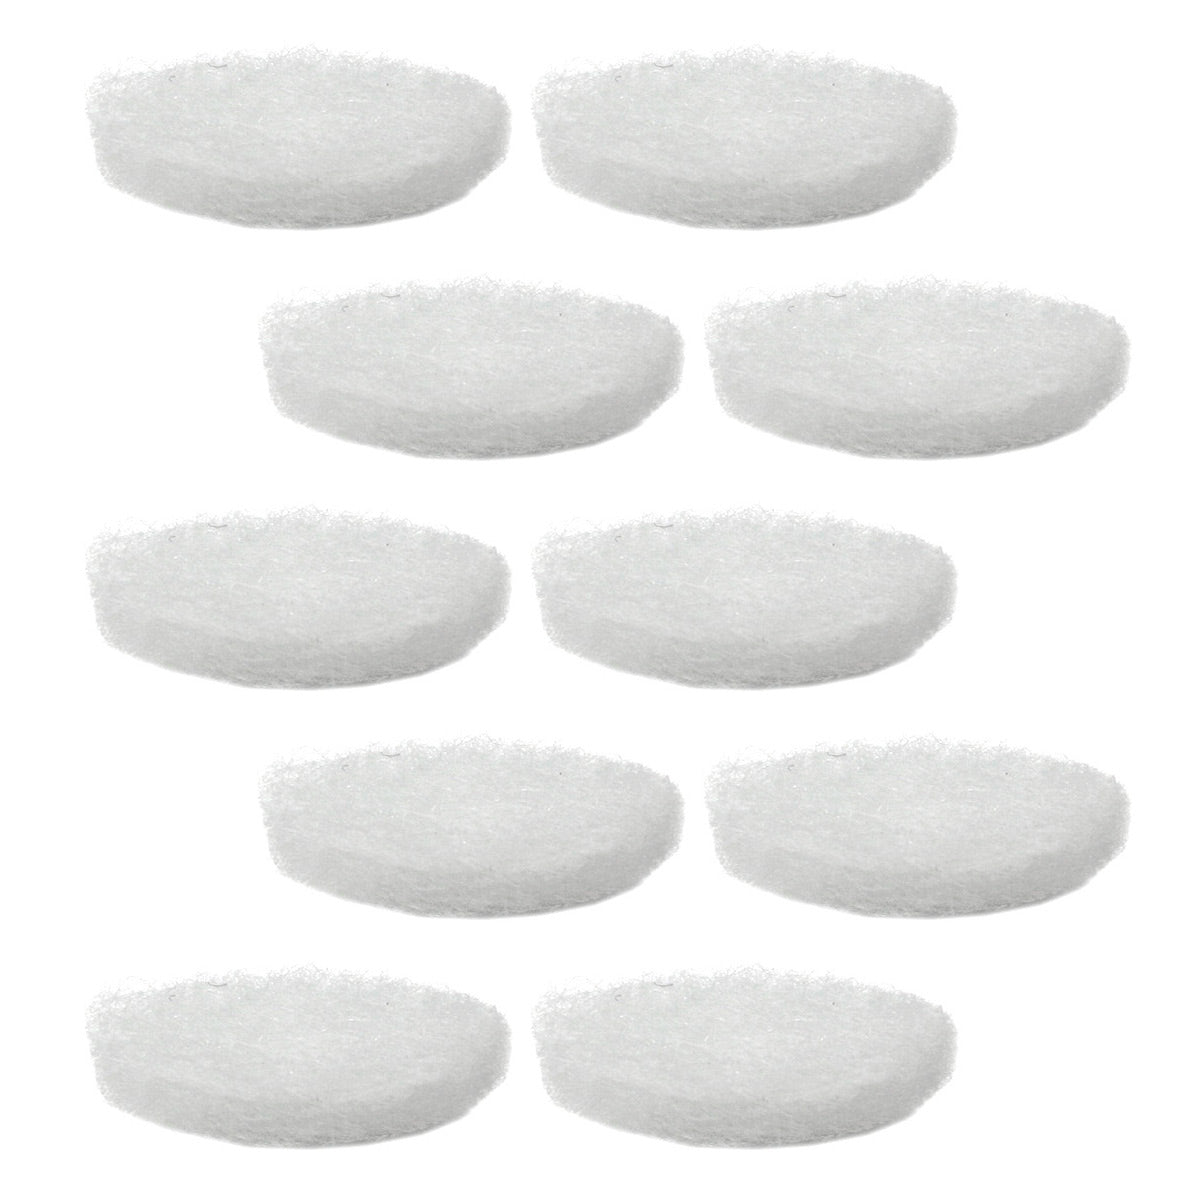 Foam Diffusers for Various FlexiFit & Oracle CPAP/BiPAP Masks (10 Pack)